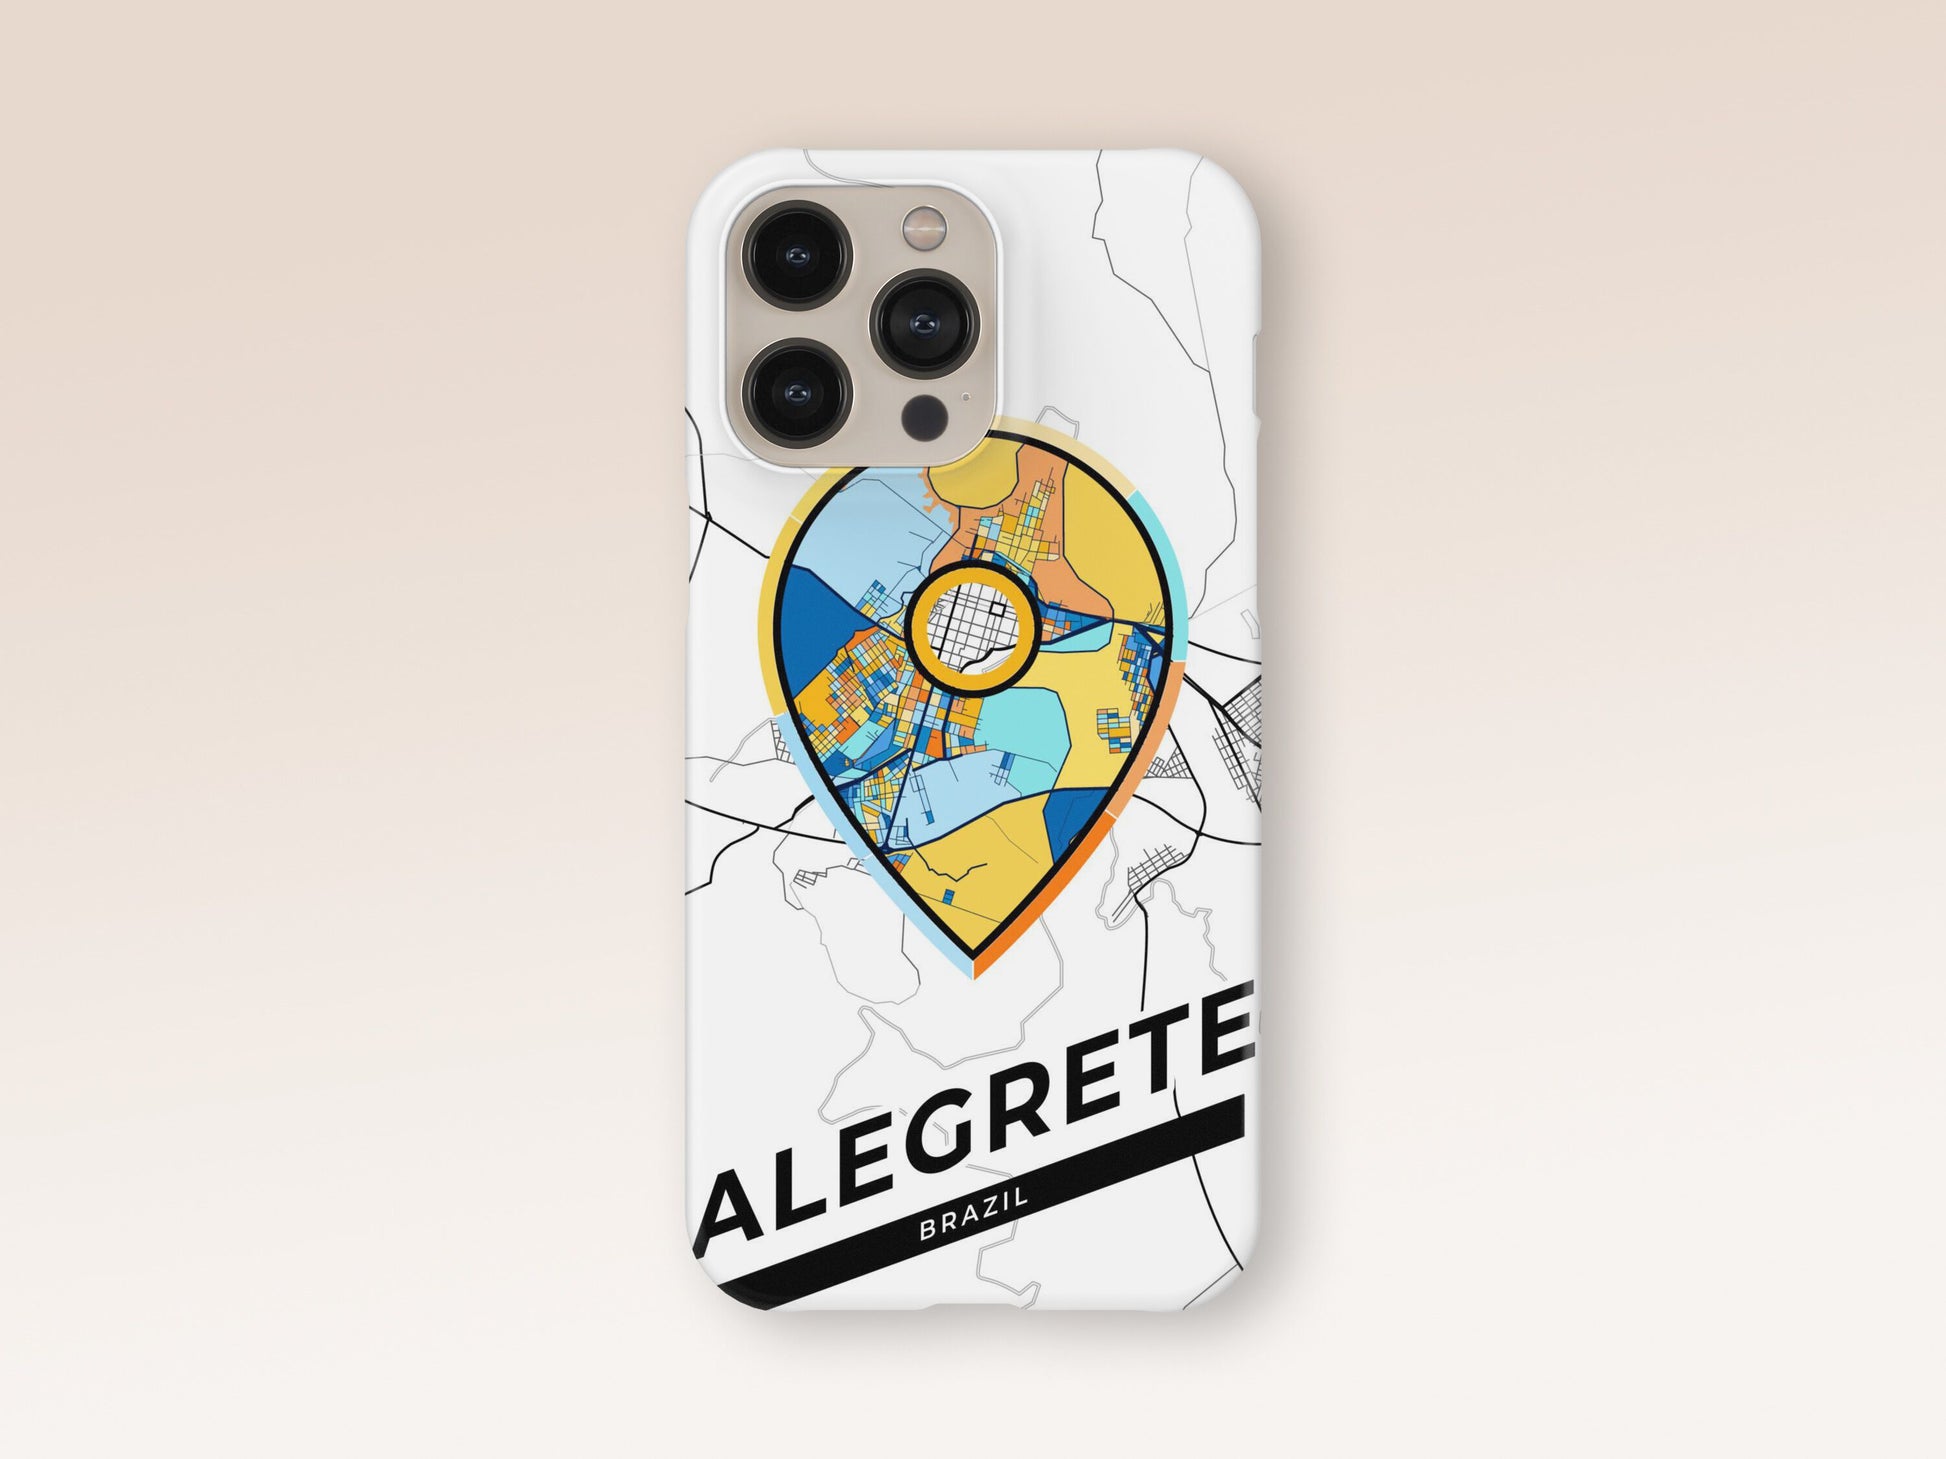 Alegrete Brazil slim phone case with colorful icon. Birthday, wedding or housewarming gift. Couple match cases. 1